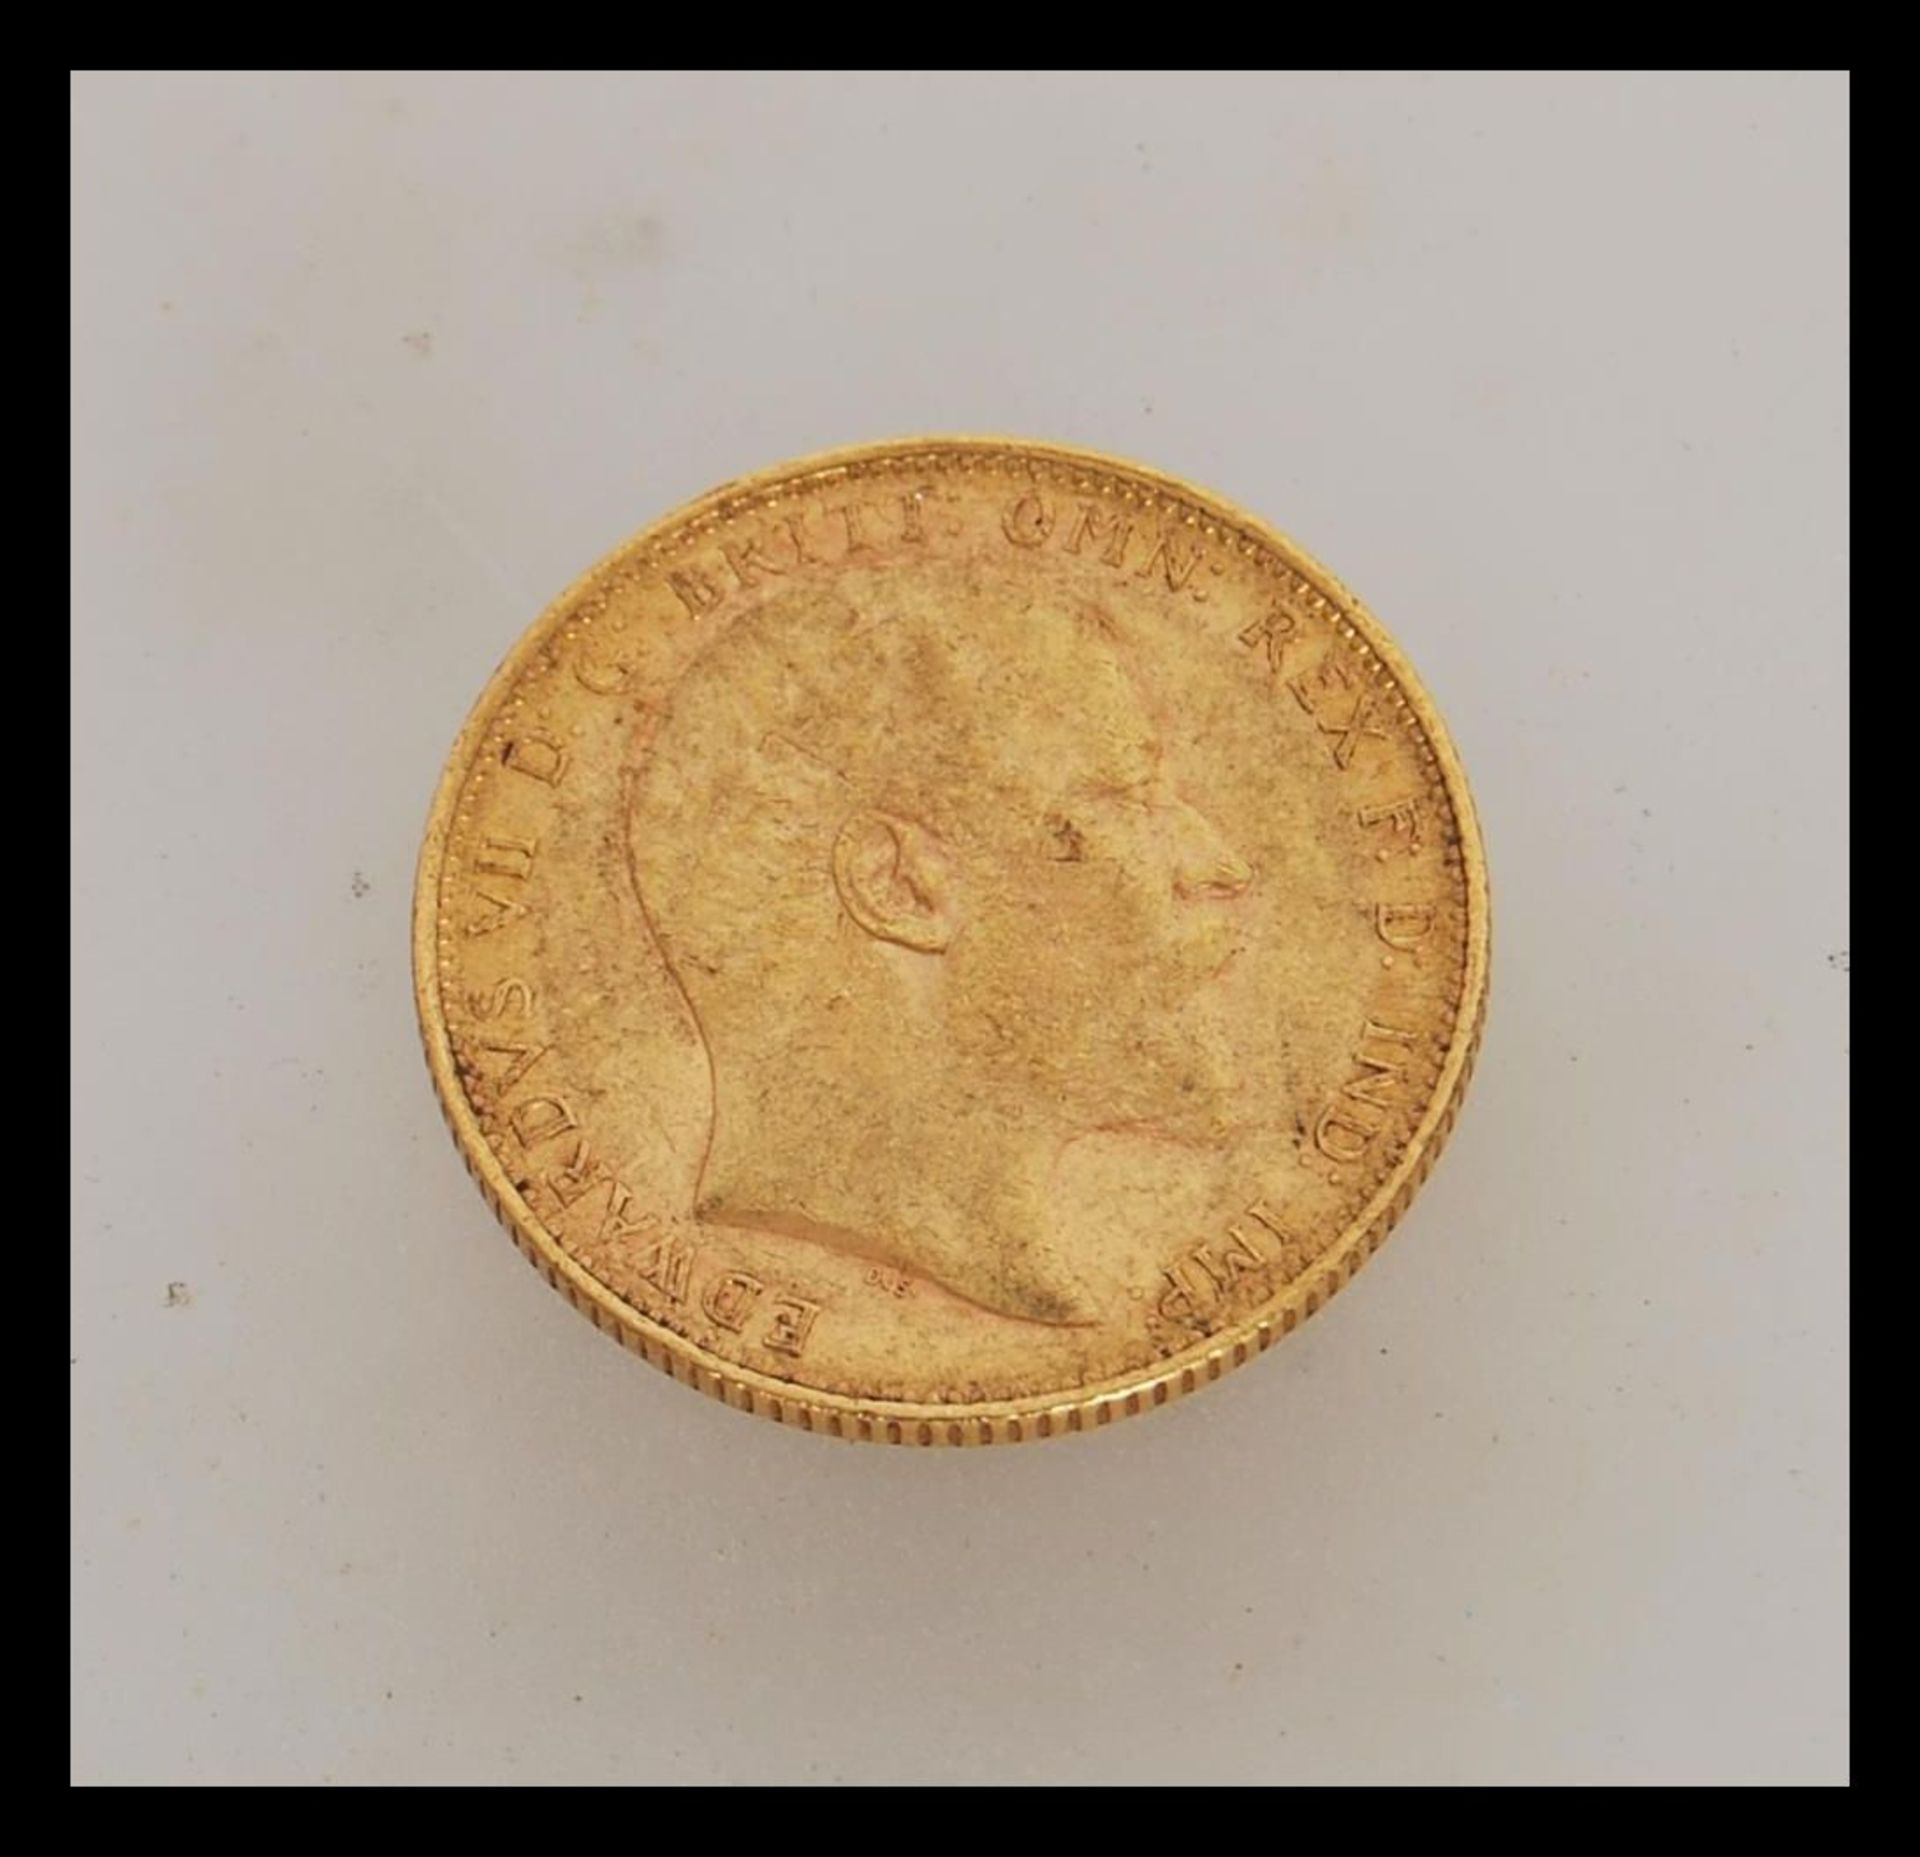 A 1904 Edward VII full gold sovereign stamped for the Melbourne mint. Weight 8.0g.